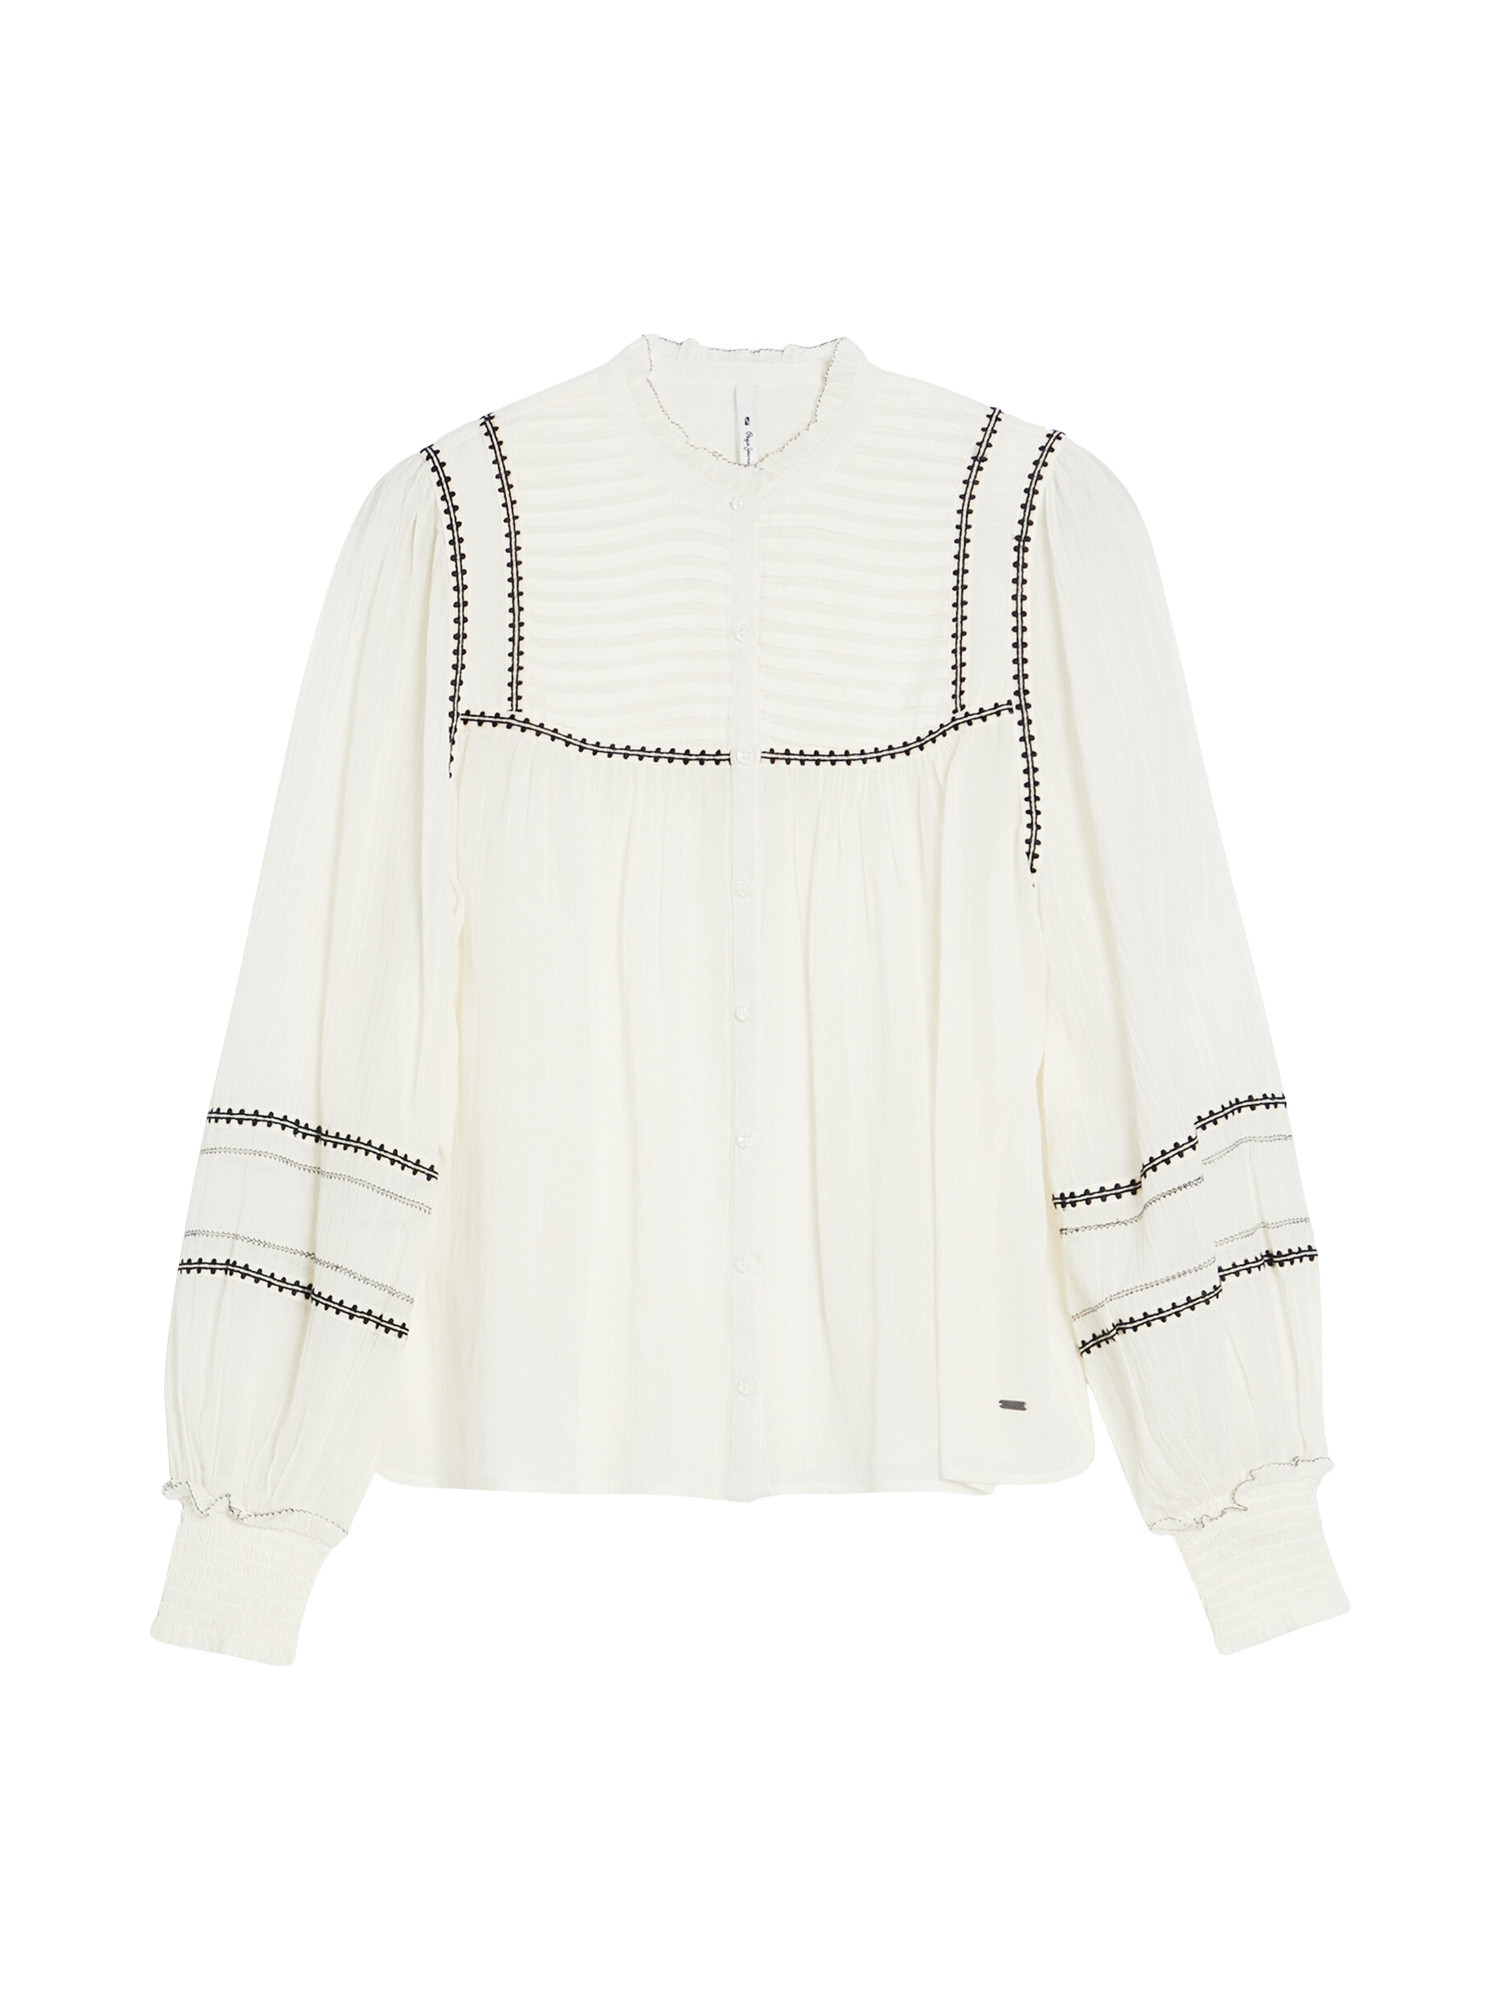 Pepe Jeans - Blouse with embroidered details, White, large image number 0